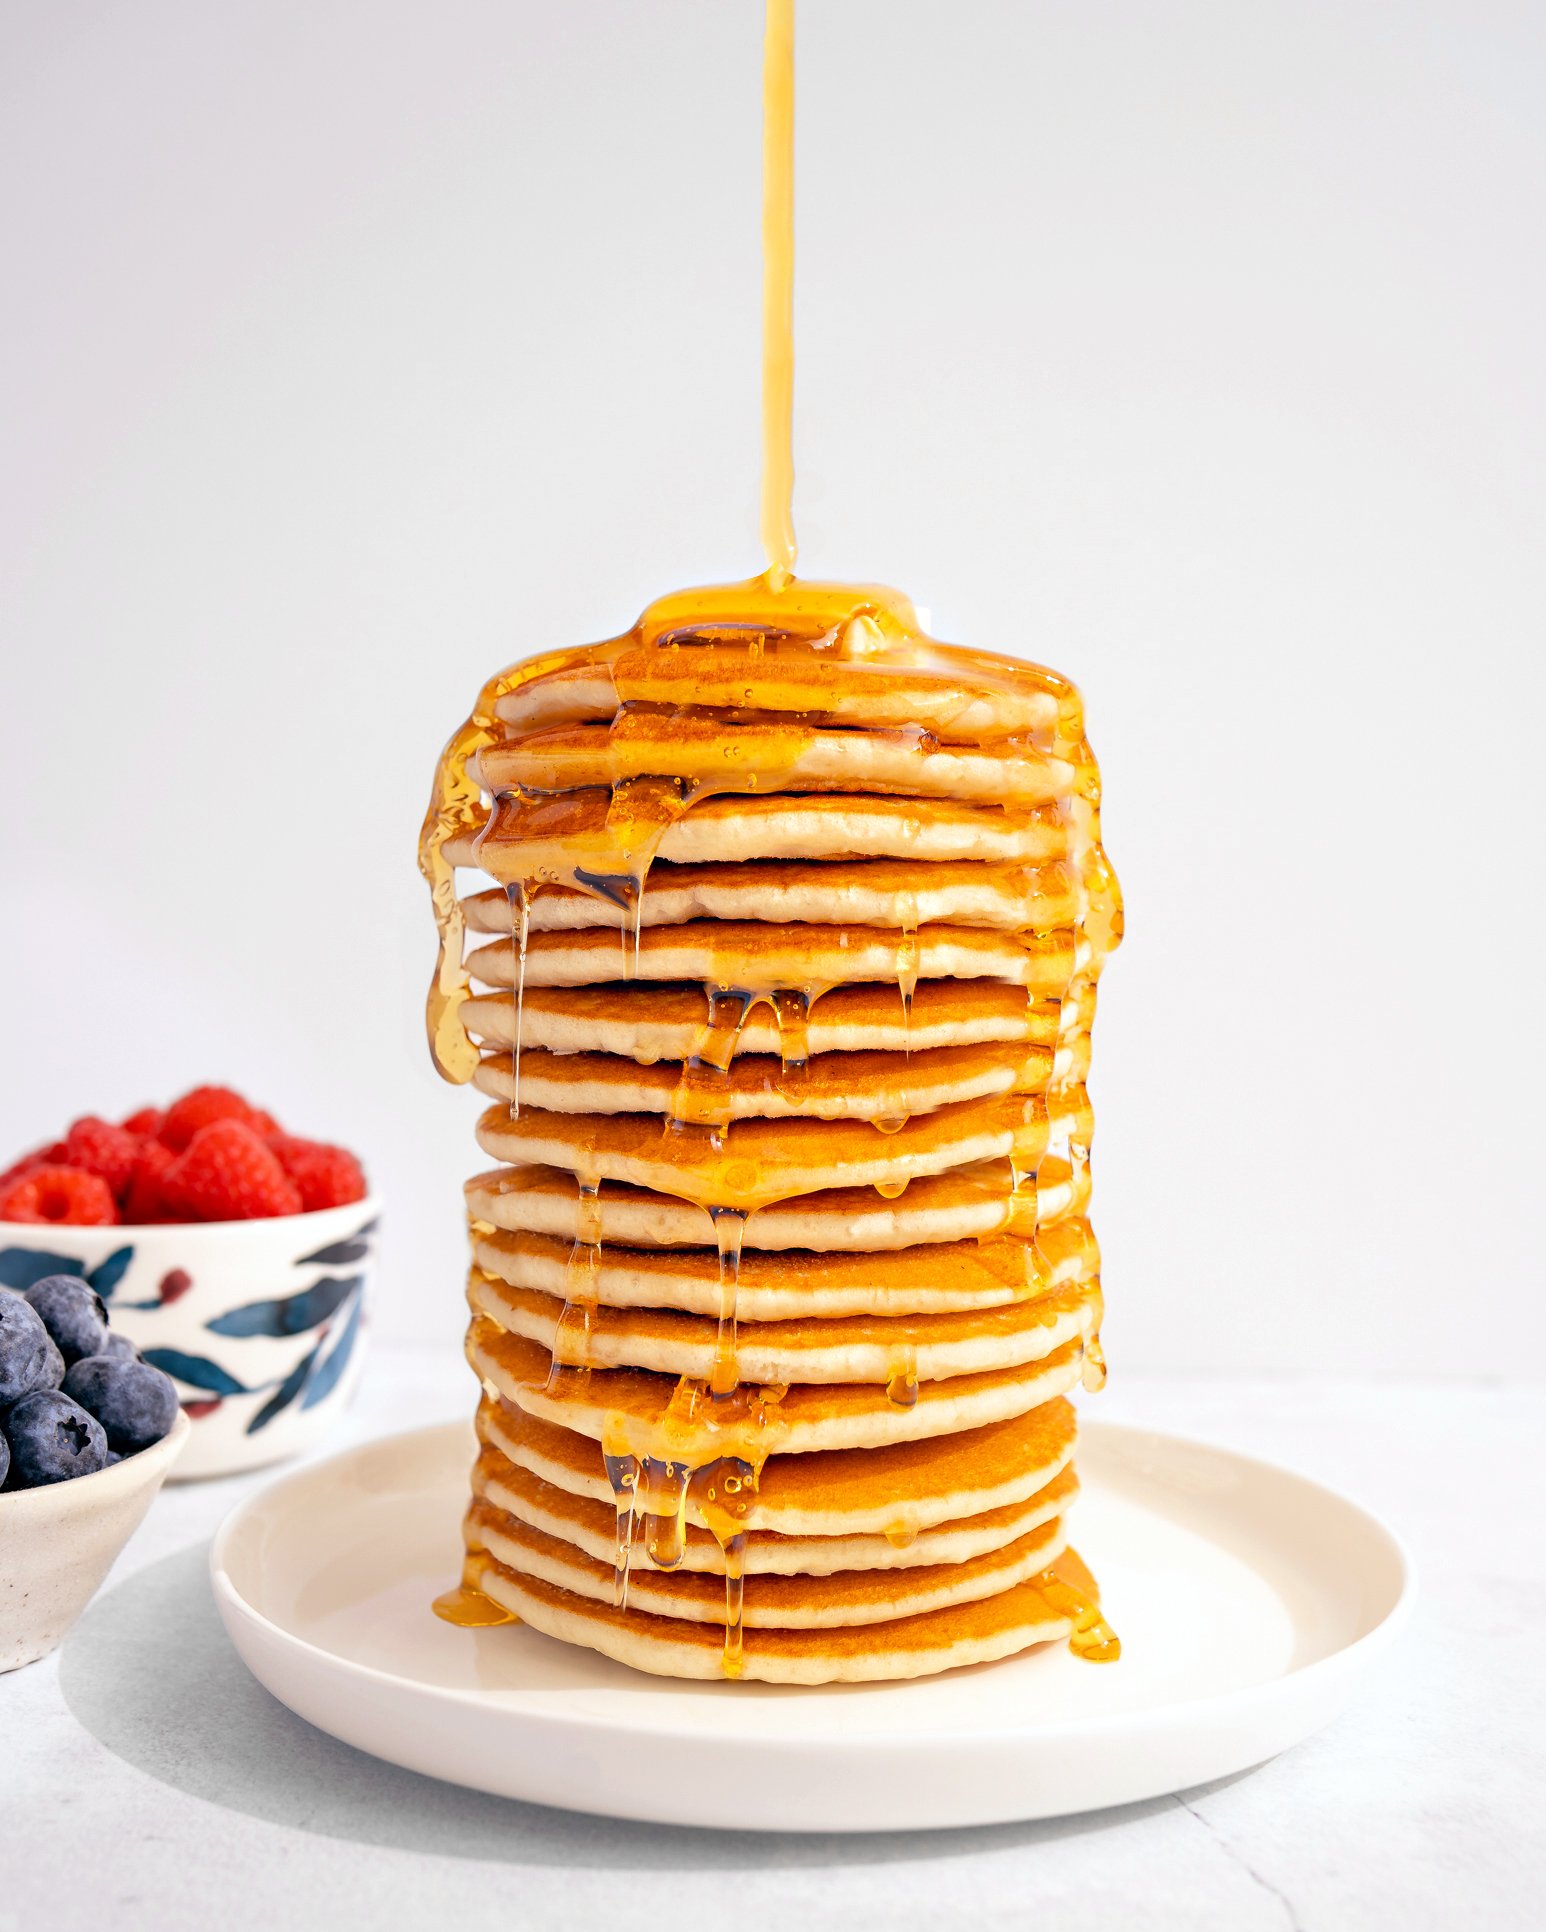 2022_11_28-22281-Organic-Social-National-Maple-Syrup-Day-001.jpg